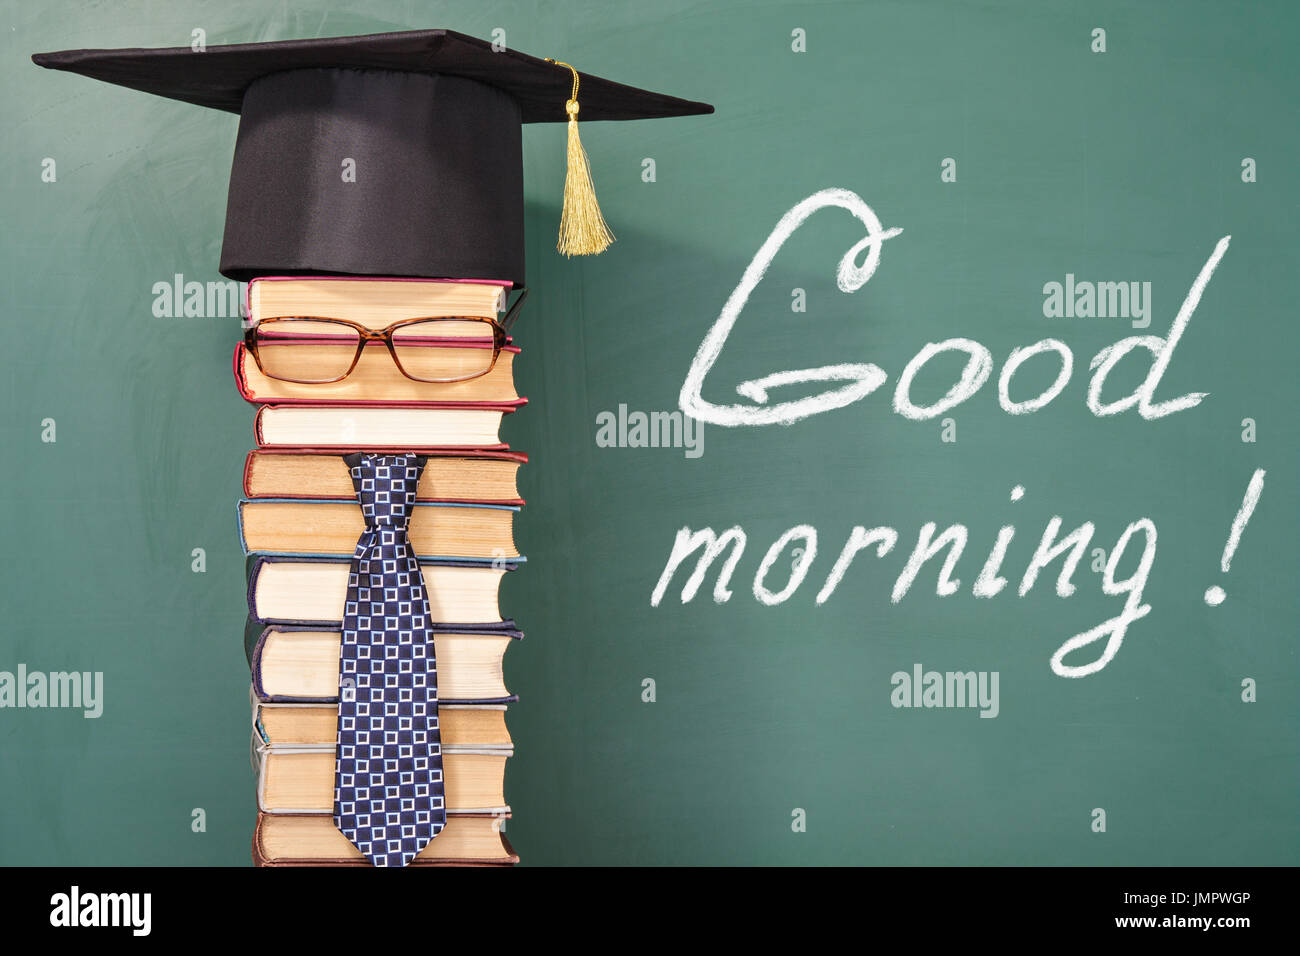 Good morning! Funny education concept Stock Photo - Alamy